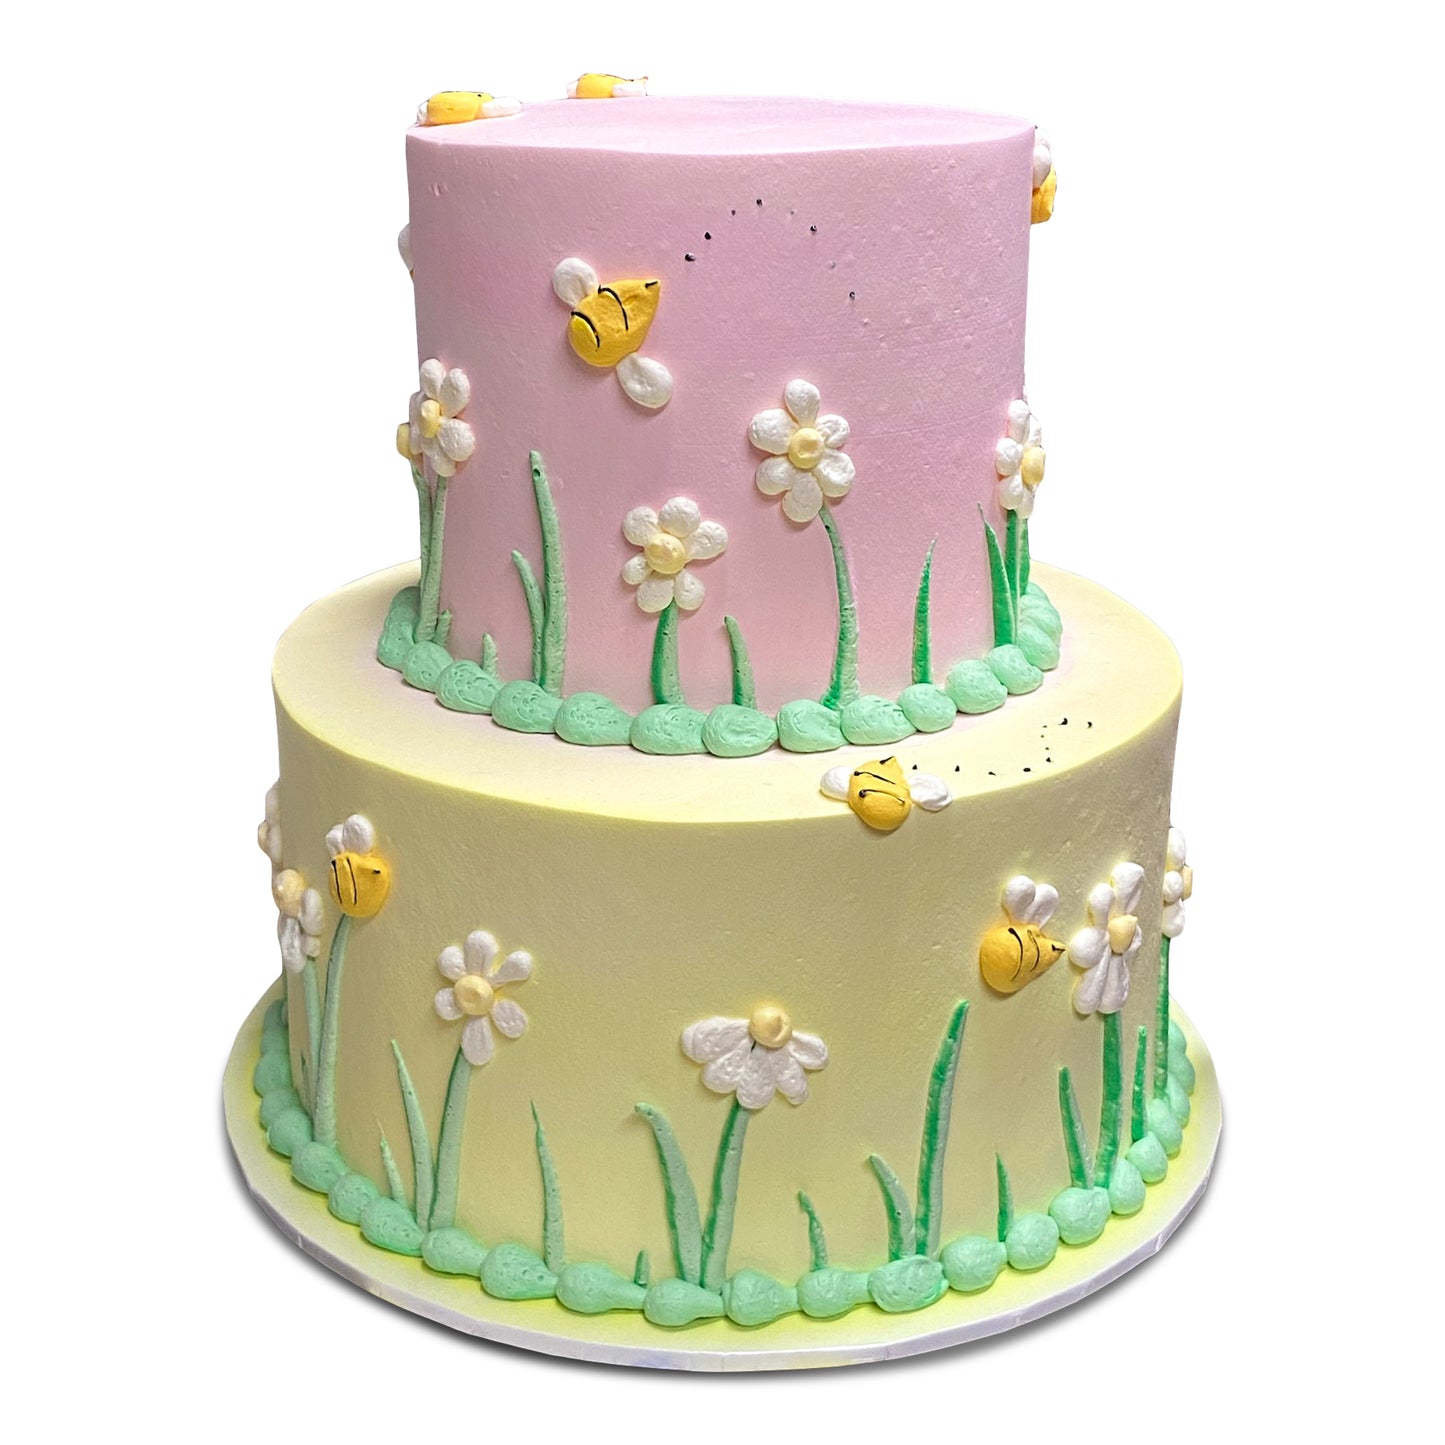 Bees and Flowers 2 Tier Cake